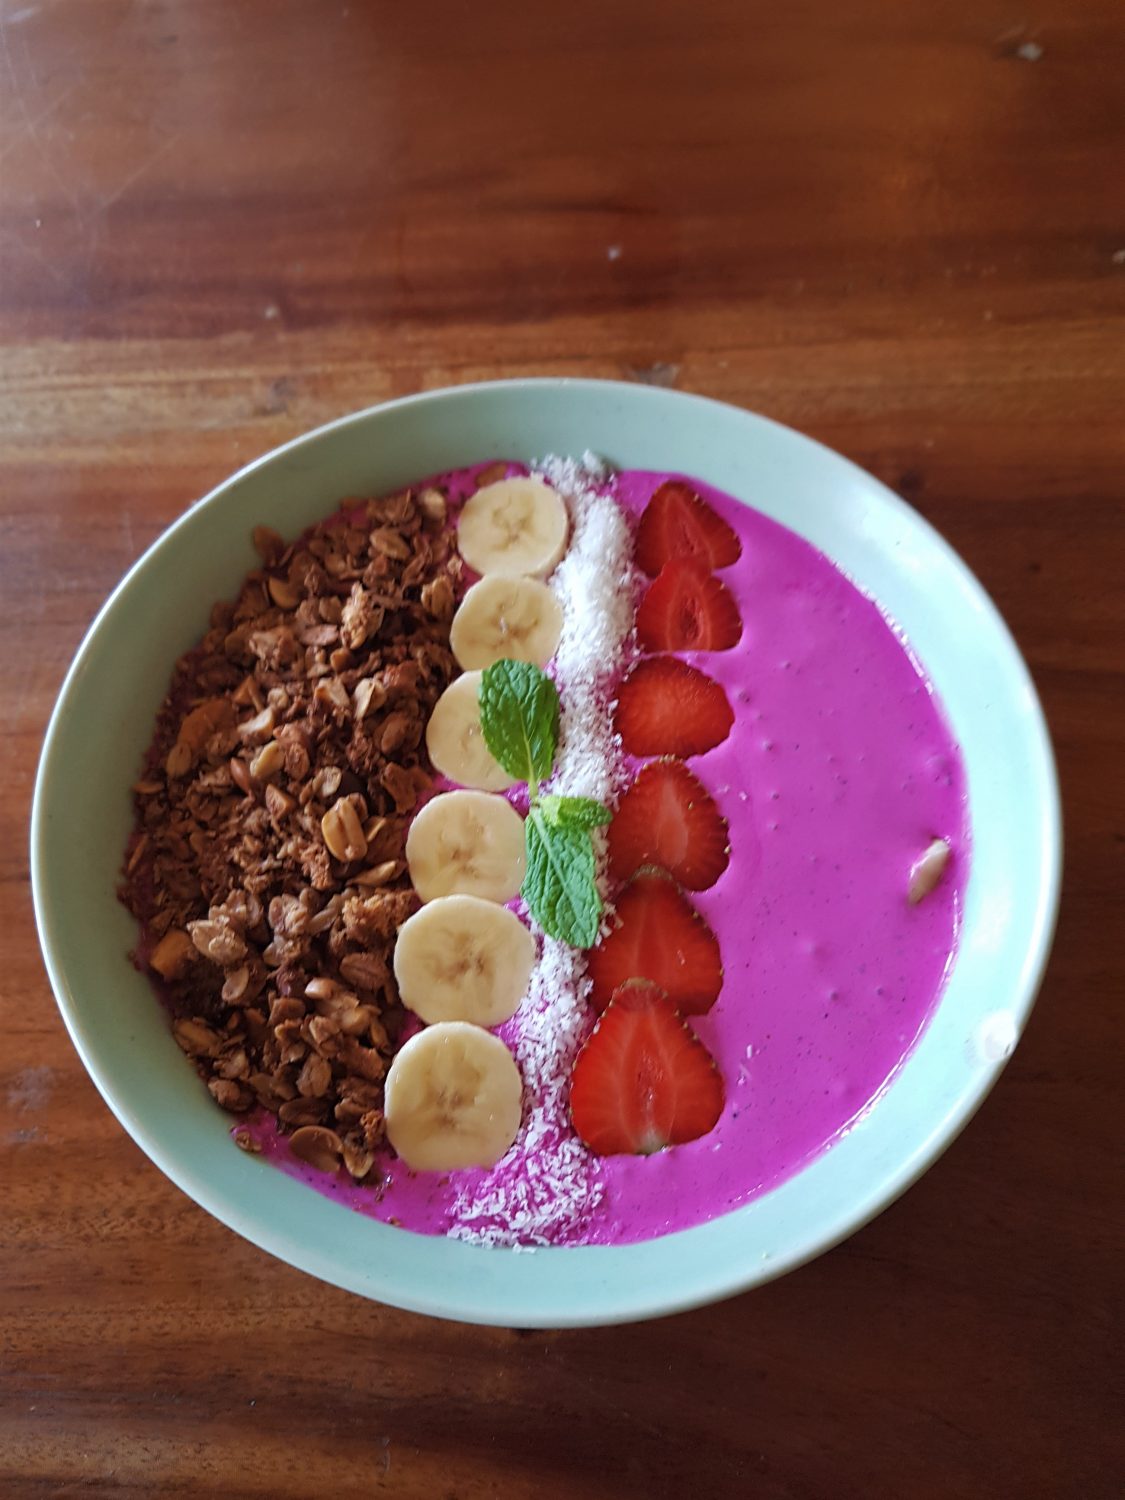 Smoothiebowl Amed Bali